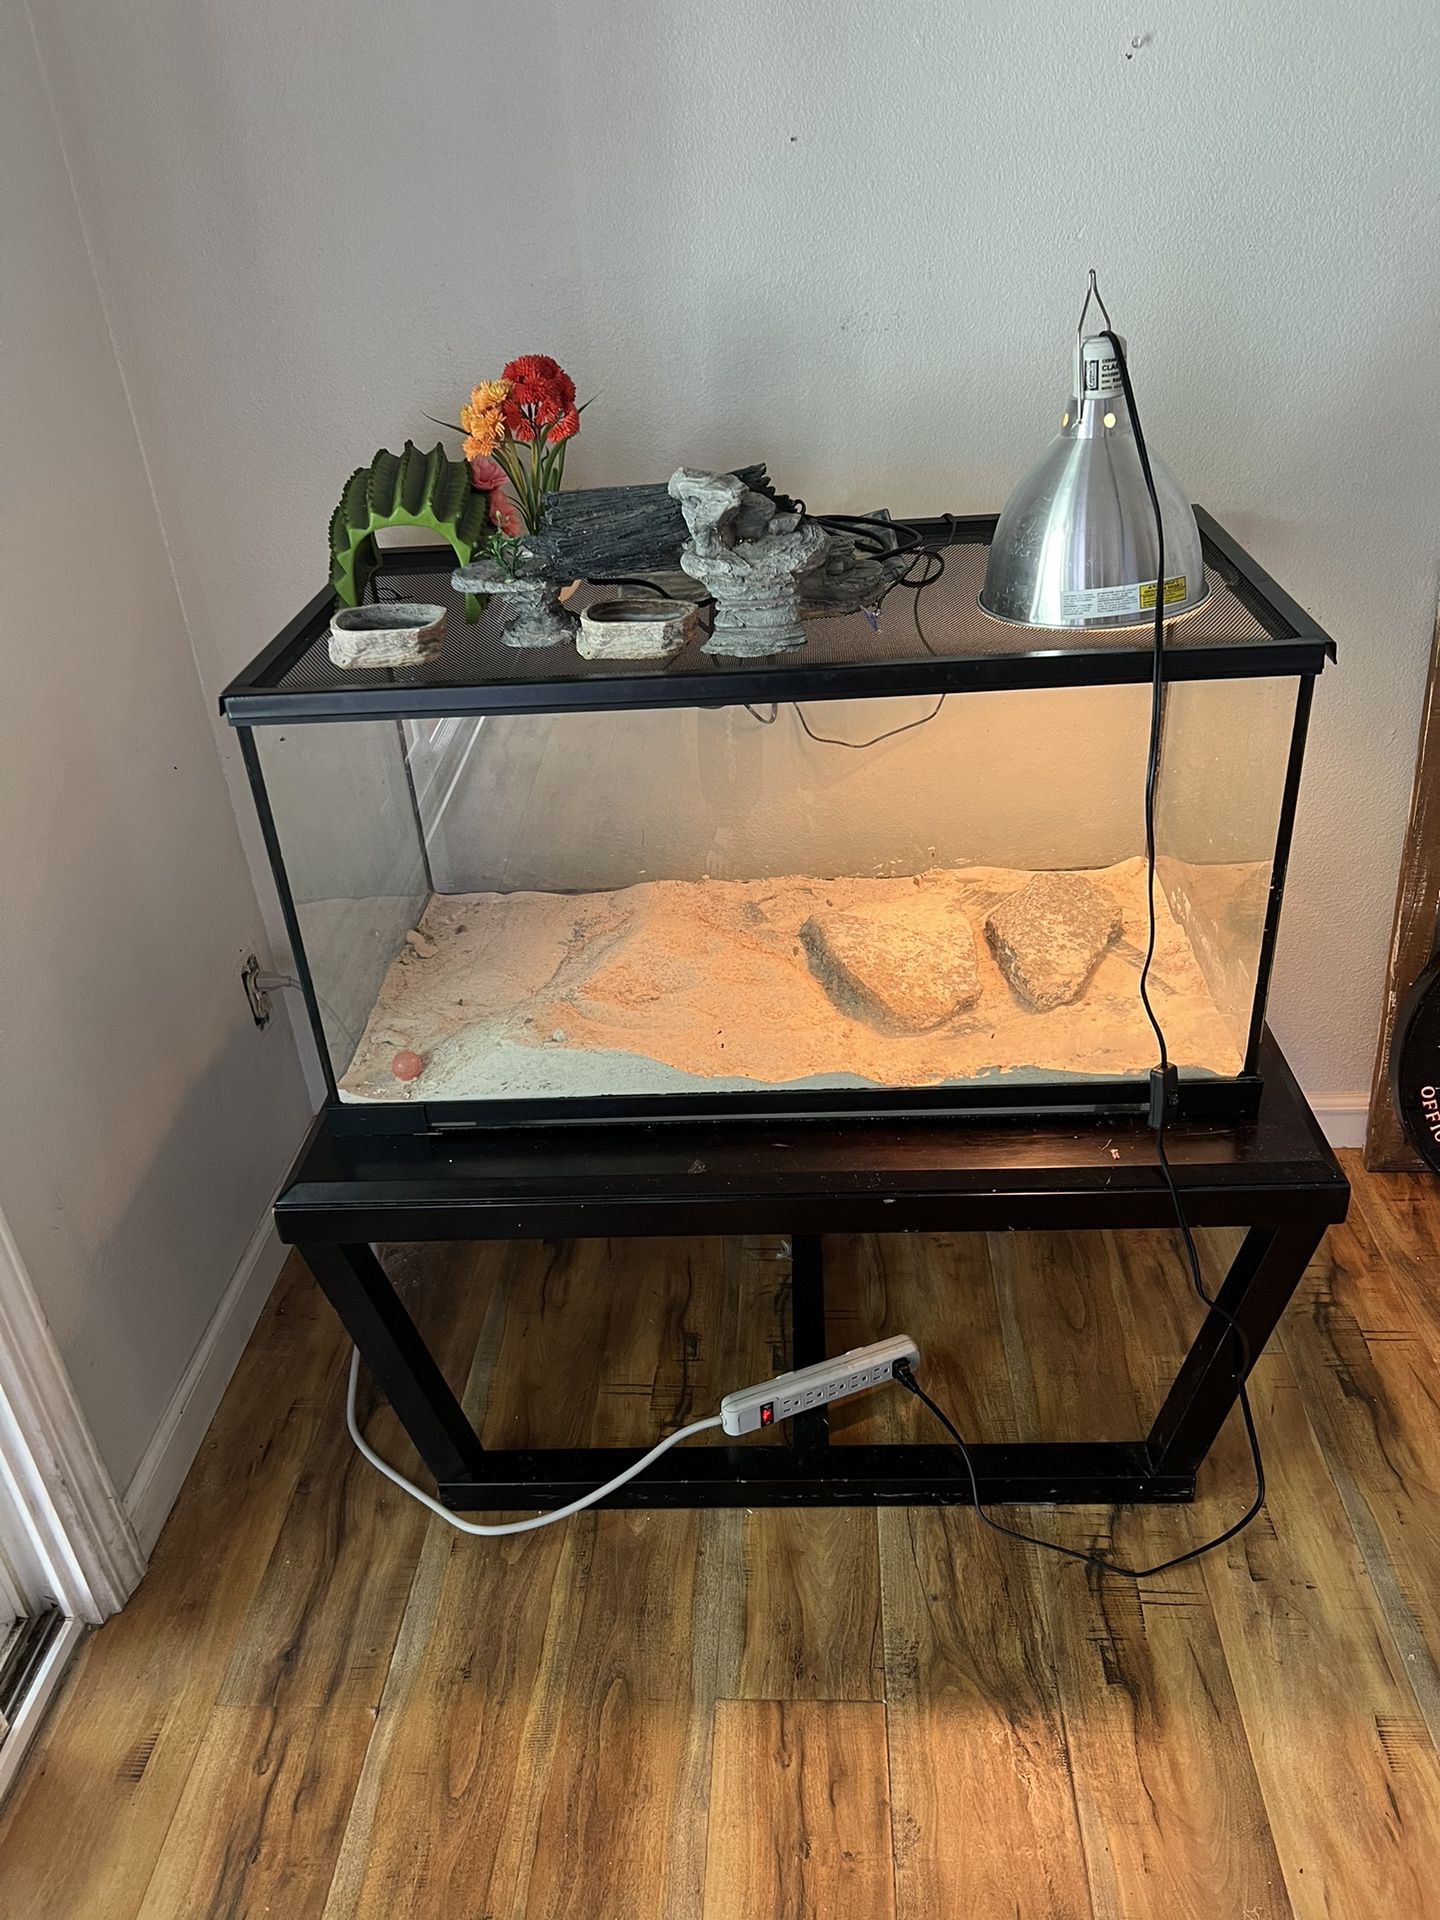 Lizard Tank Set Up And Accessories 